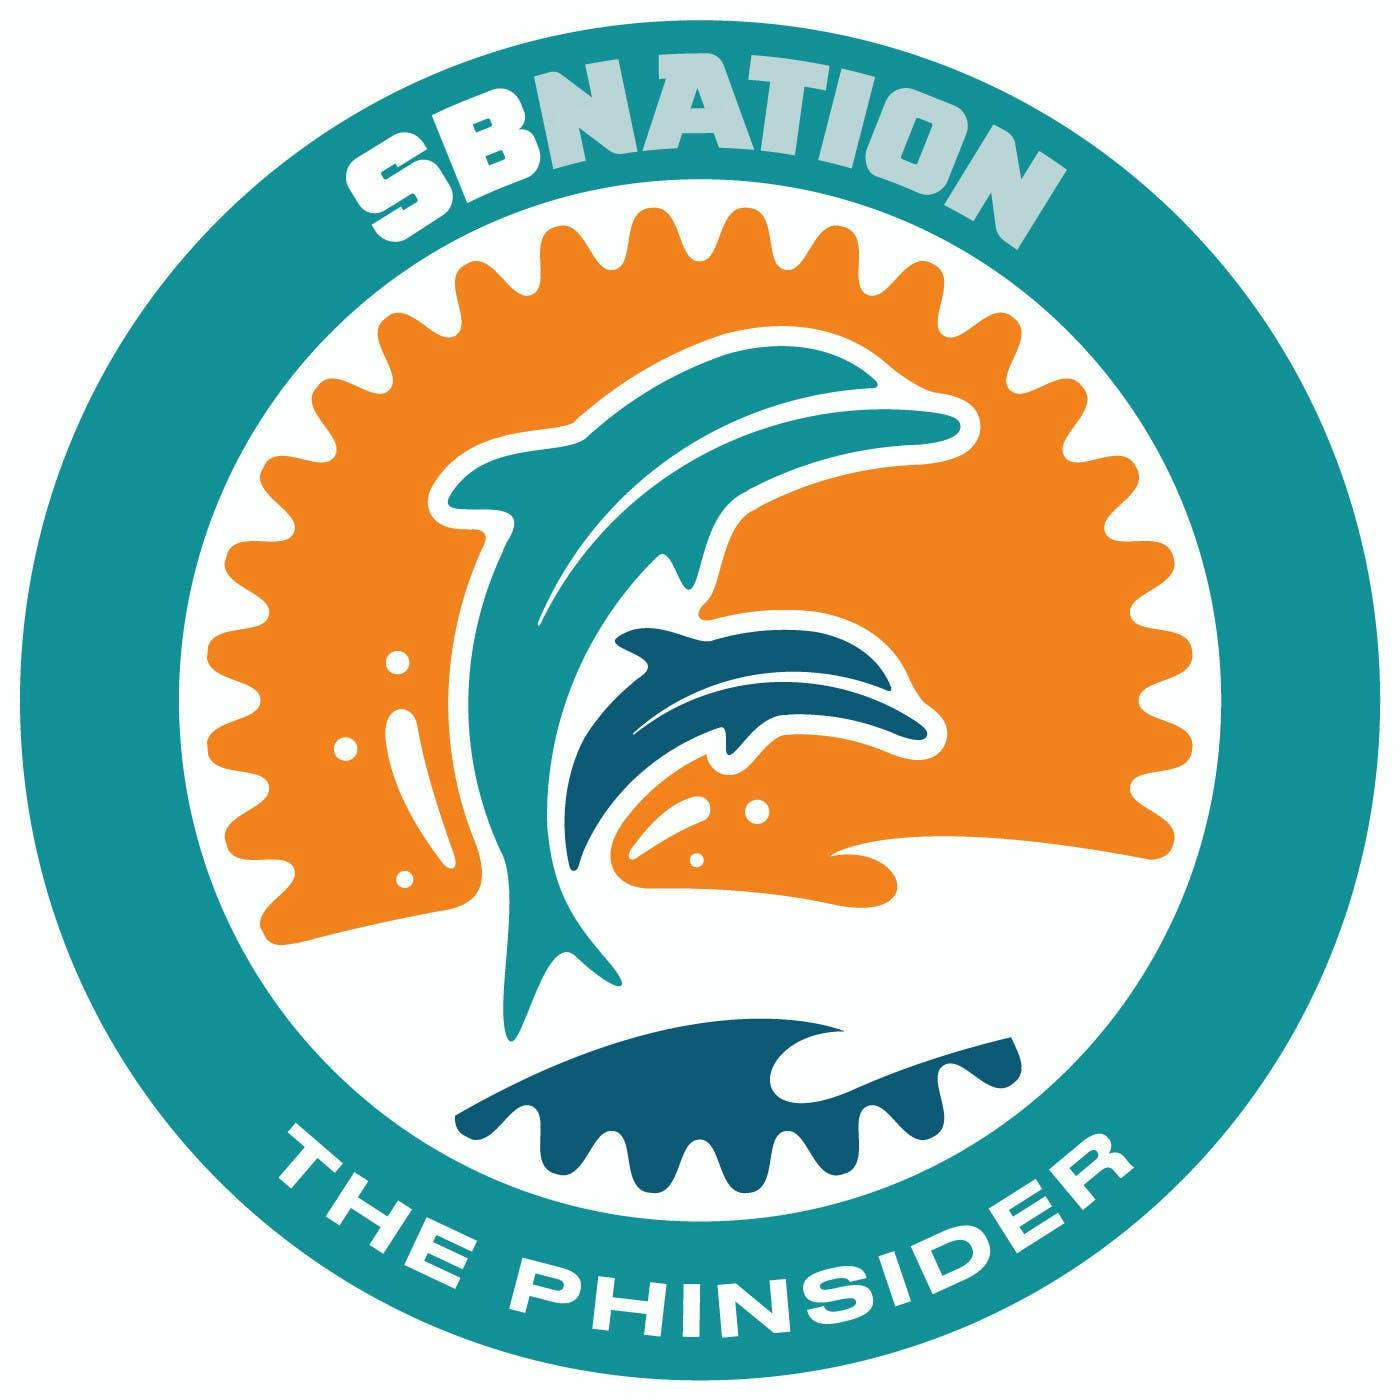 Phinsider Radio: Wash, Rinse, Repeat. It's the same story every year with the Miami Dolphins